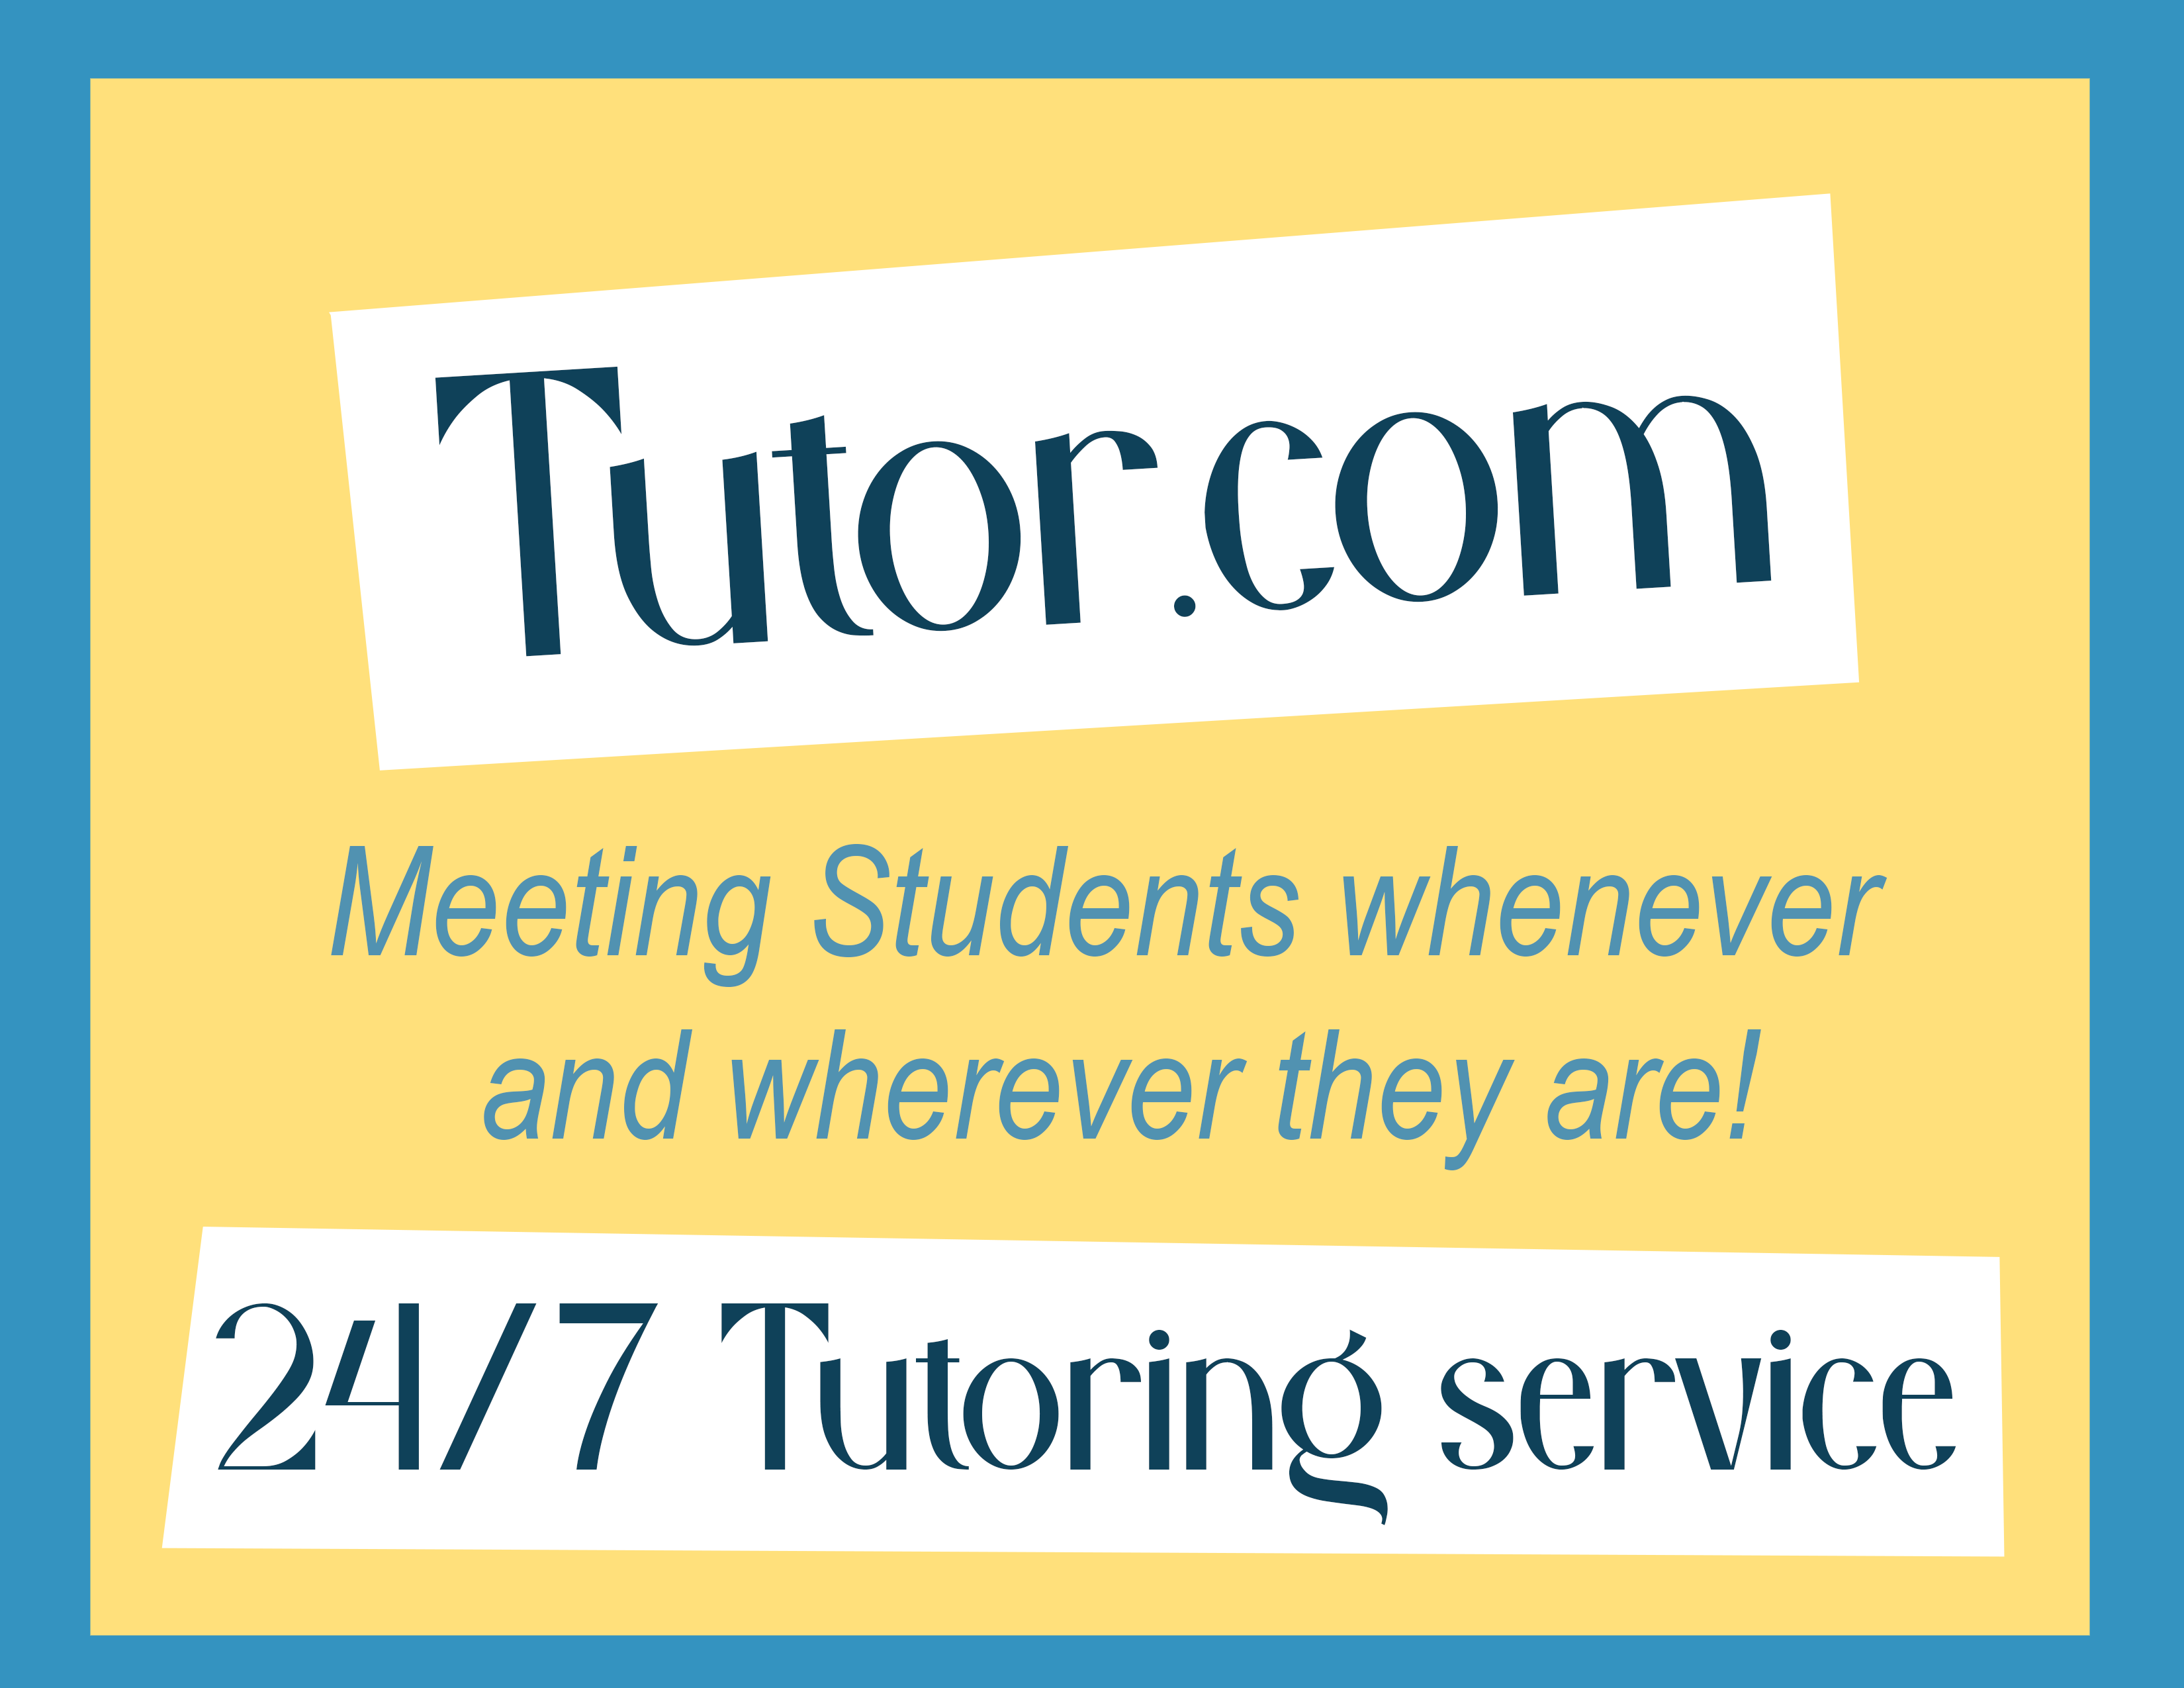 Tutor.com: Ready to Chat!